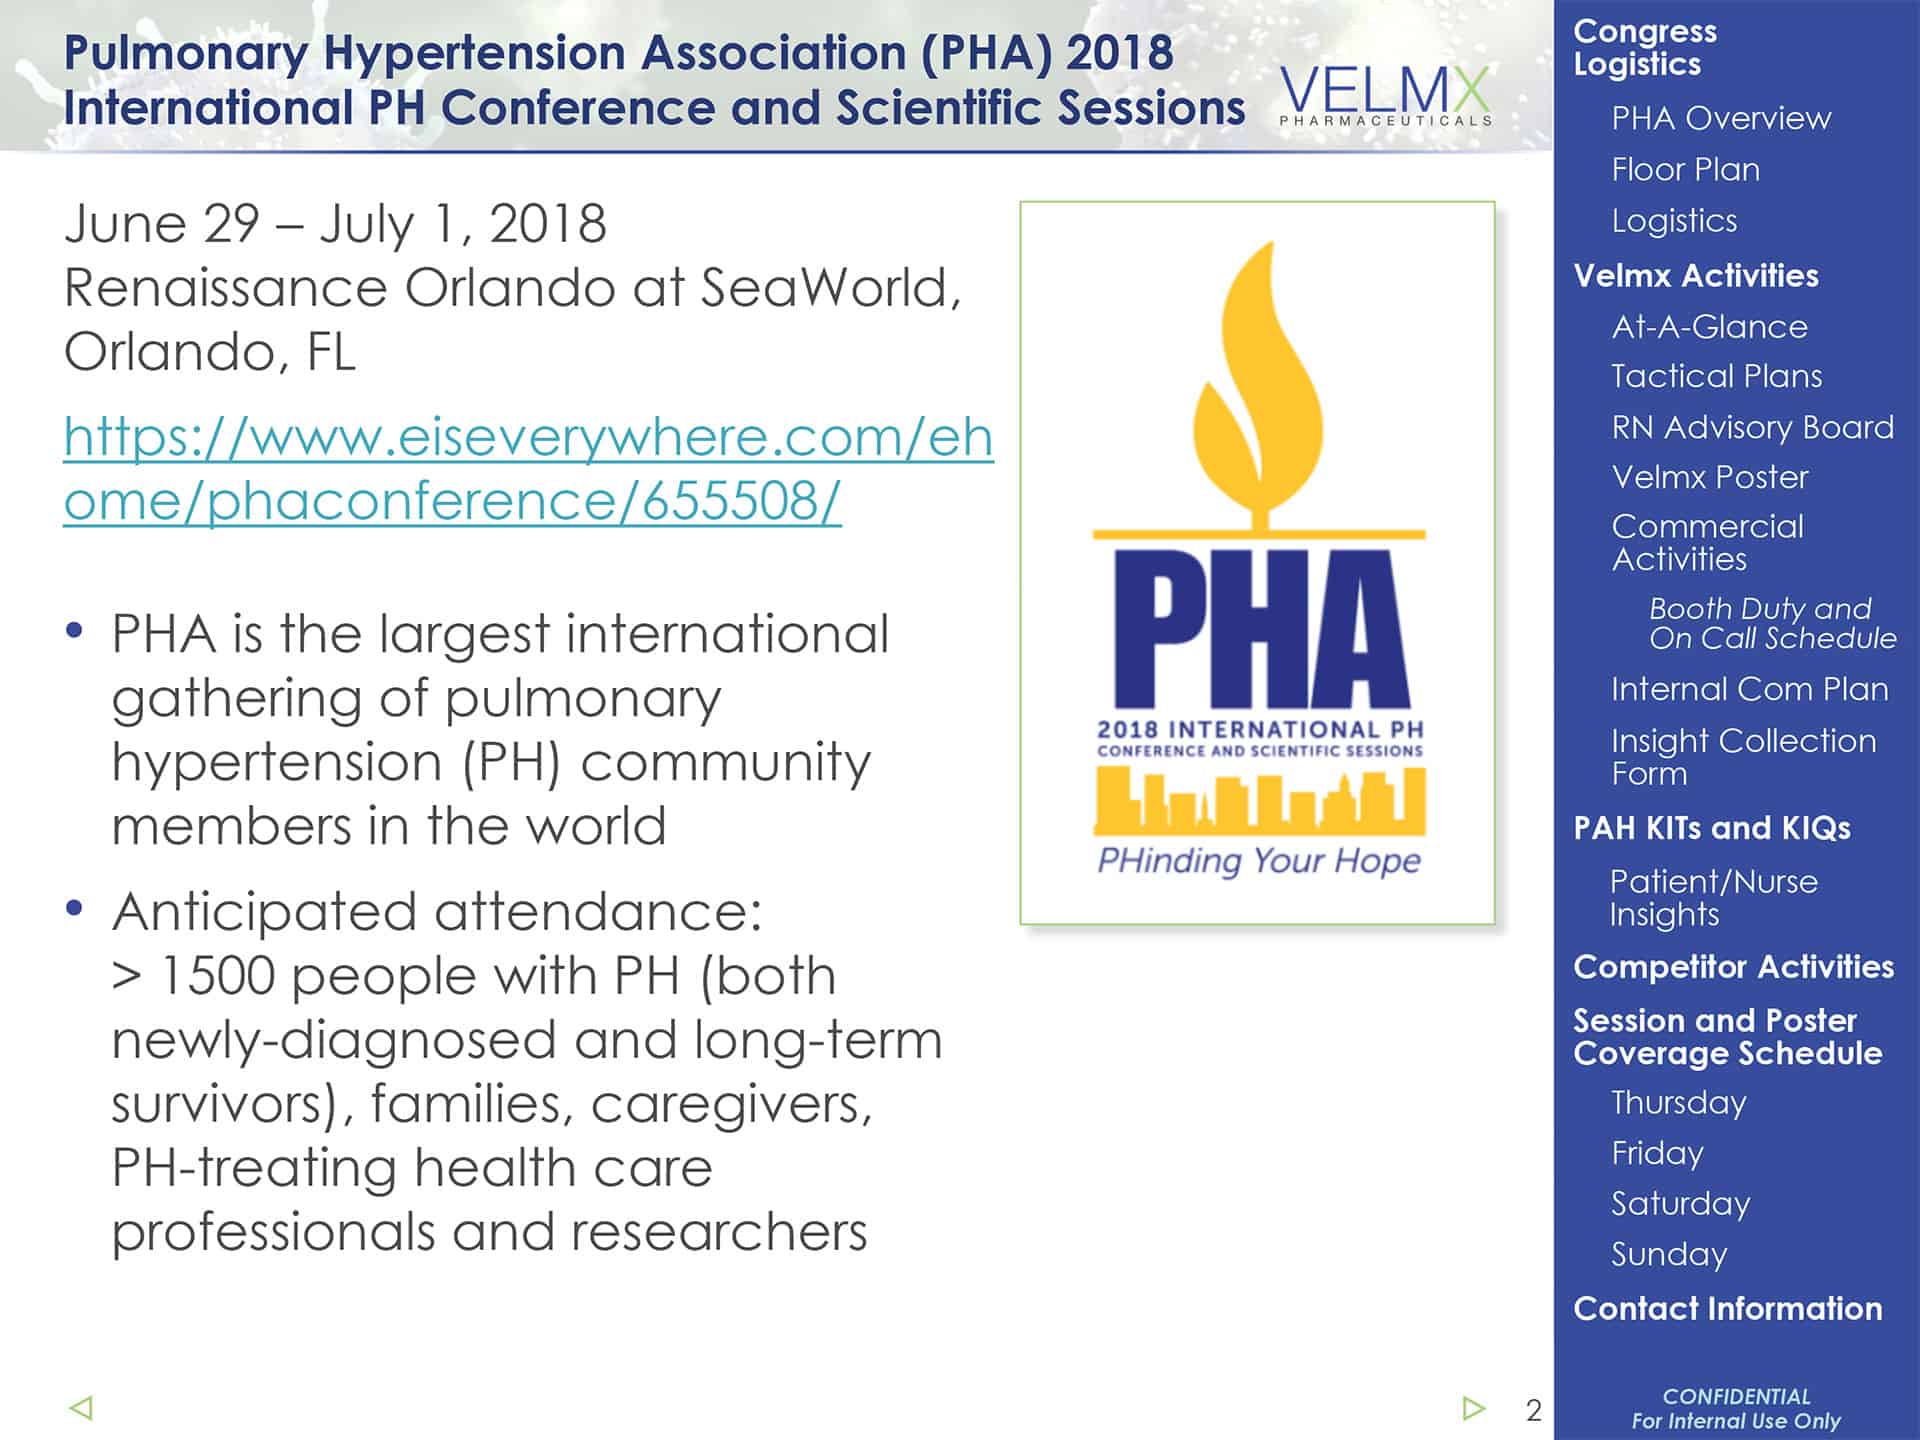 PHA's International PH Conference and scientific june 29 - july 1